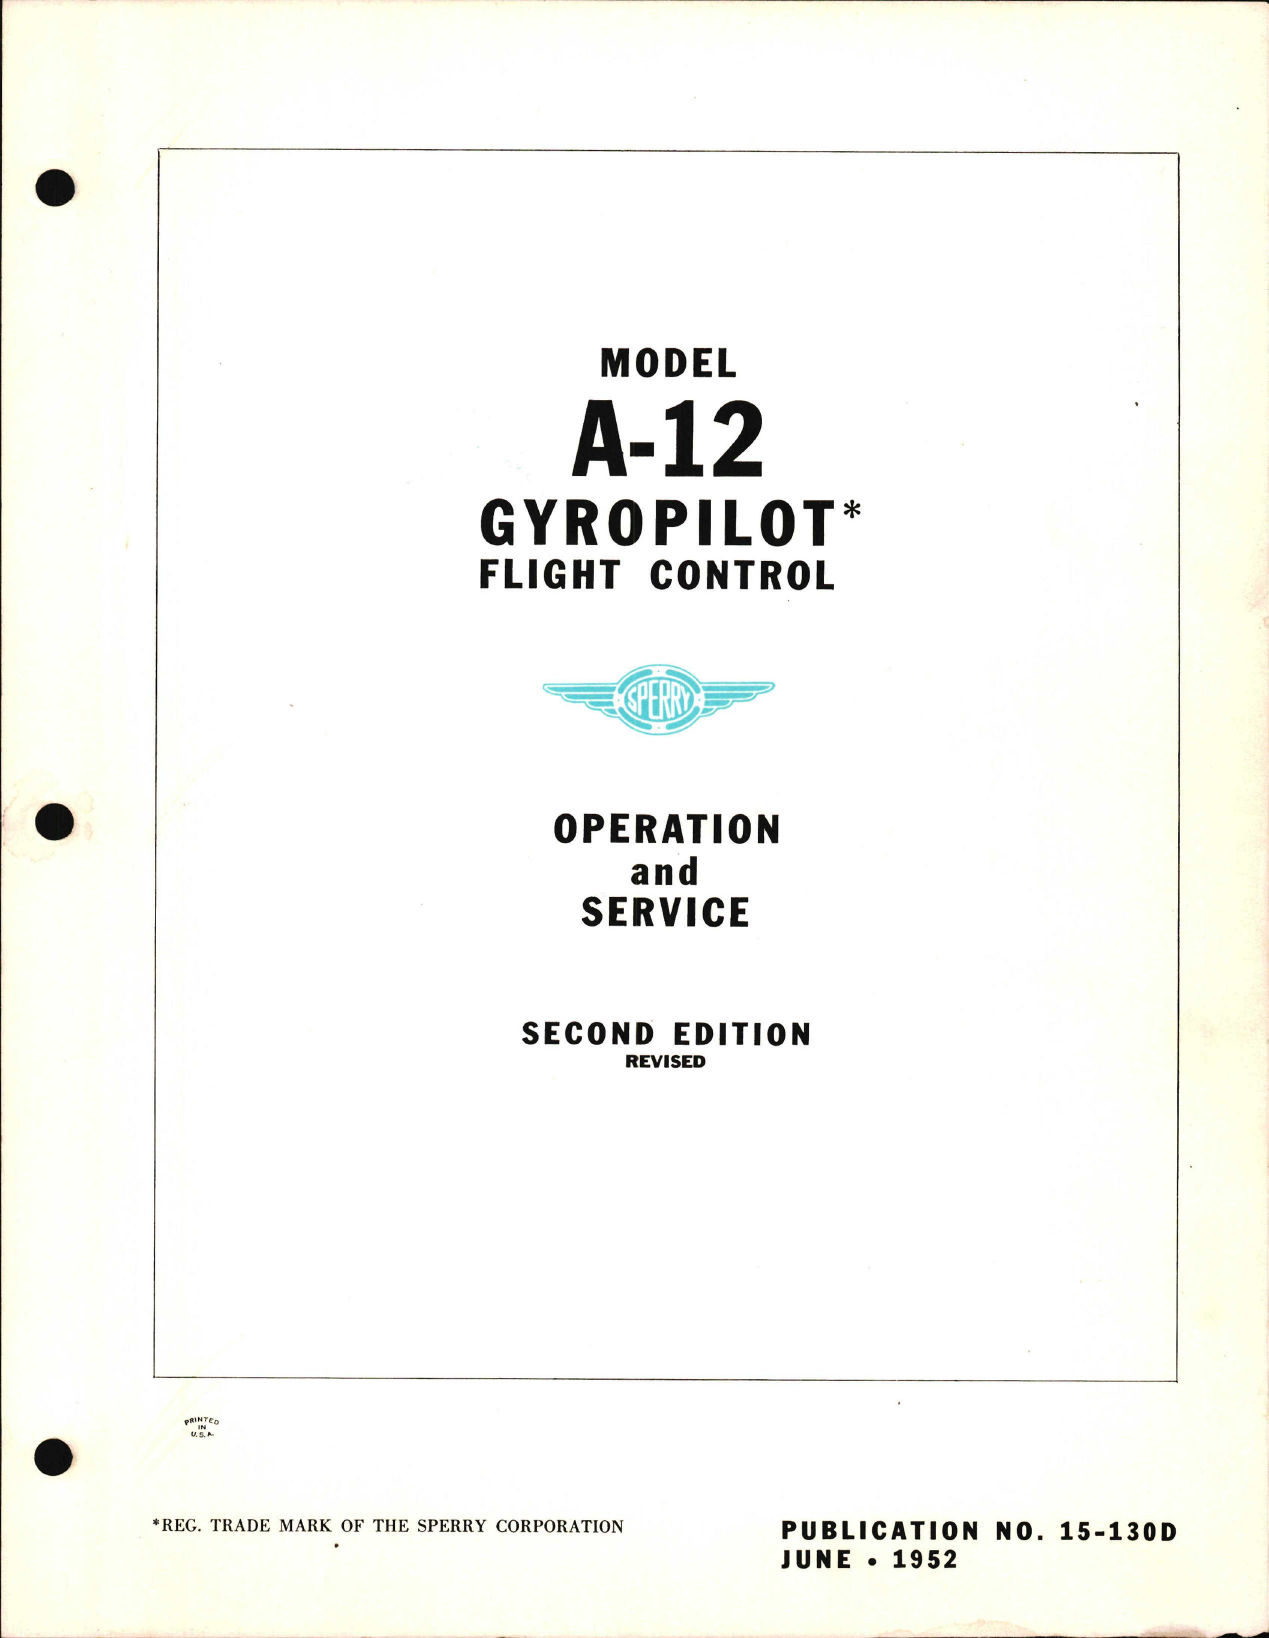 Sample page 1 from AirCorps Library document: Operation and Service for Model A-12 Gyropilot Flight Control